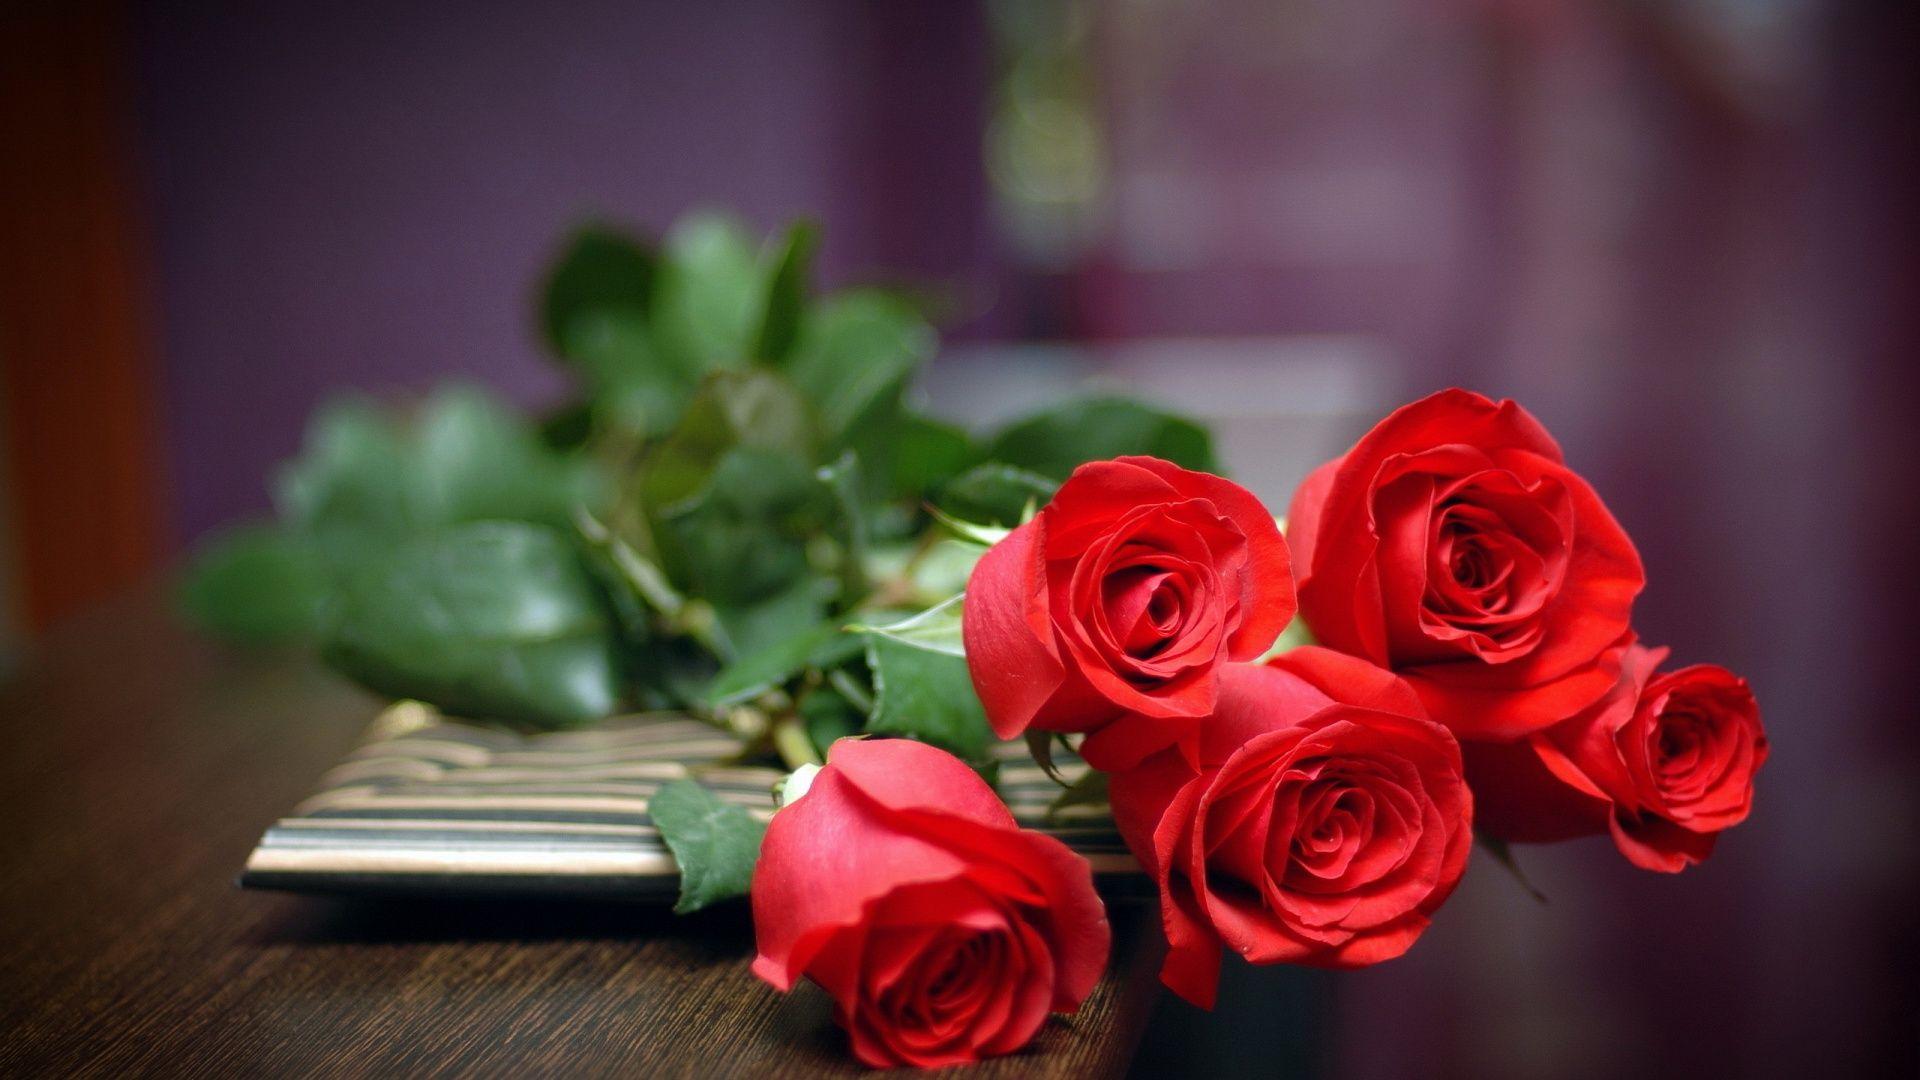 Background Red Rose Image Collection On Cute Roses Wallpaper High